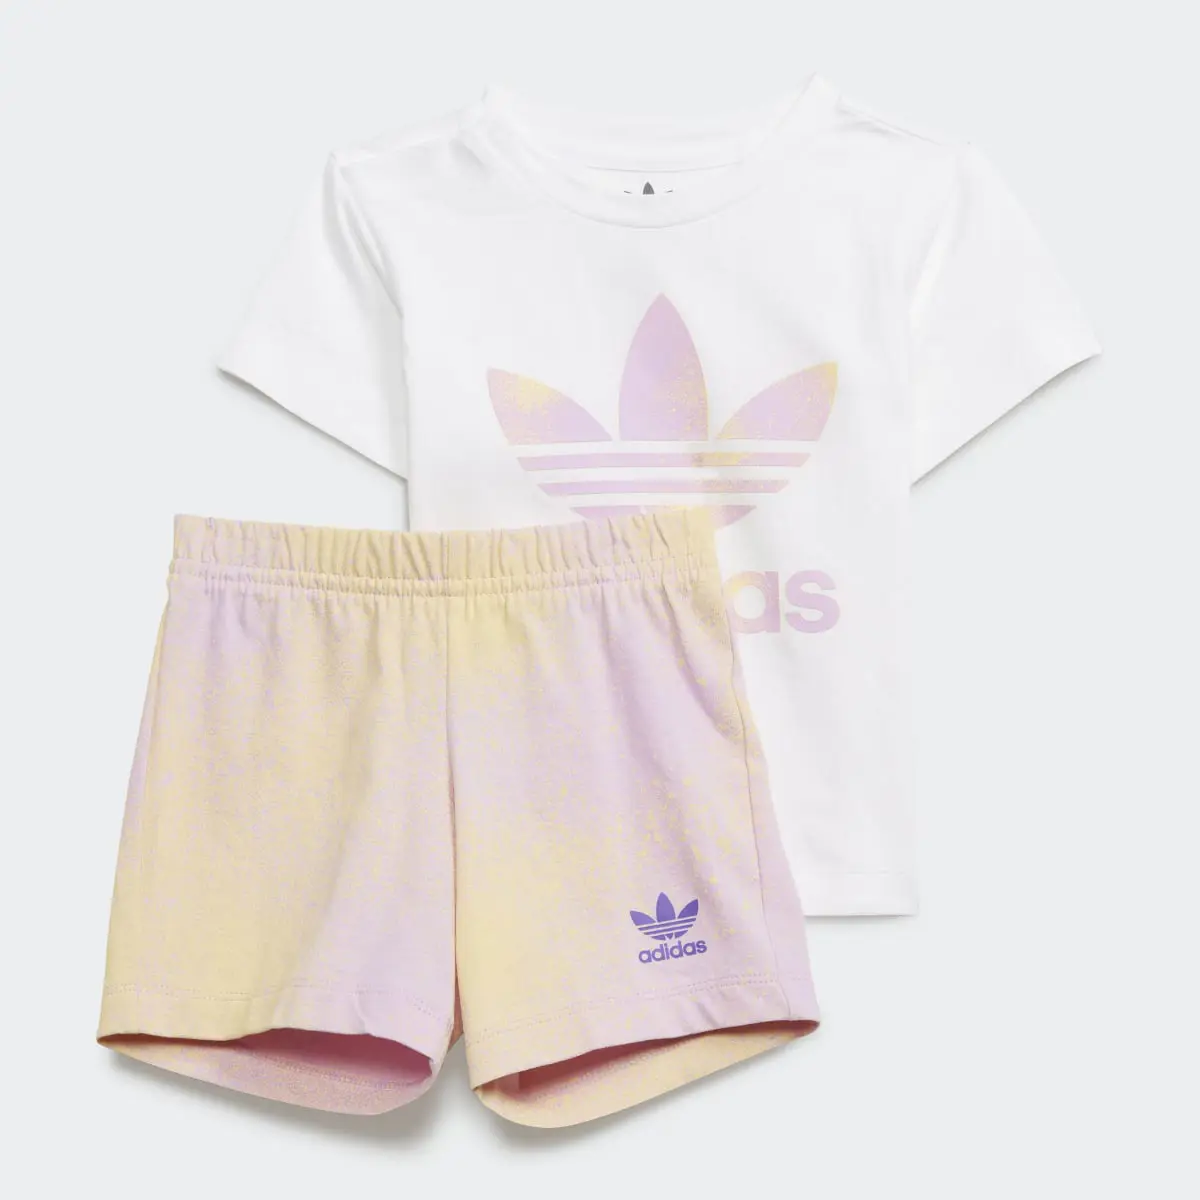 Adidas Completo Graphic Logo Shorts and Tee. 2